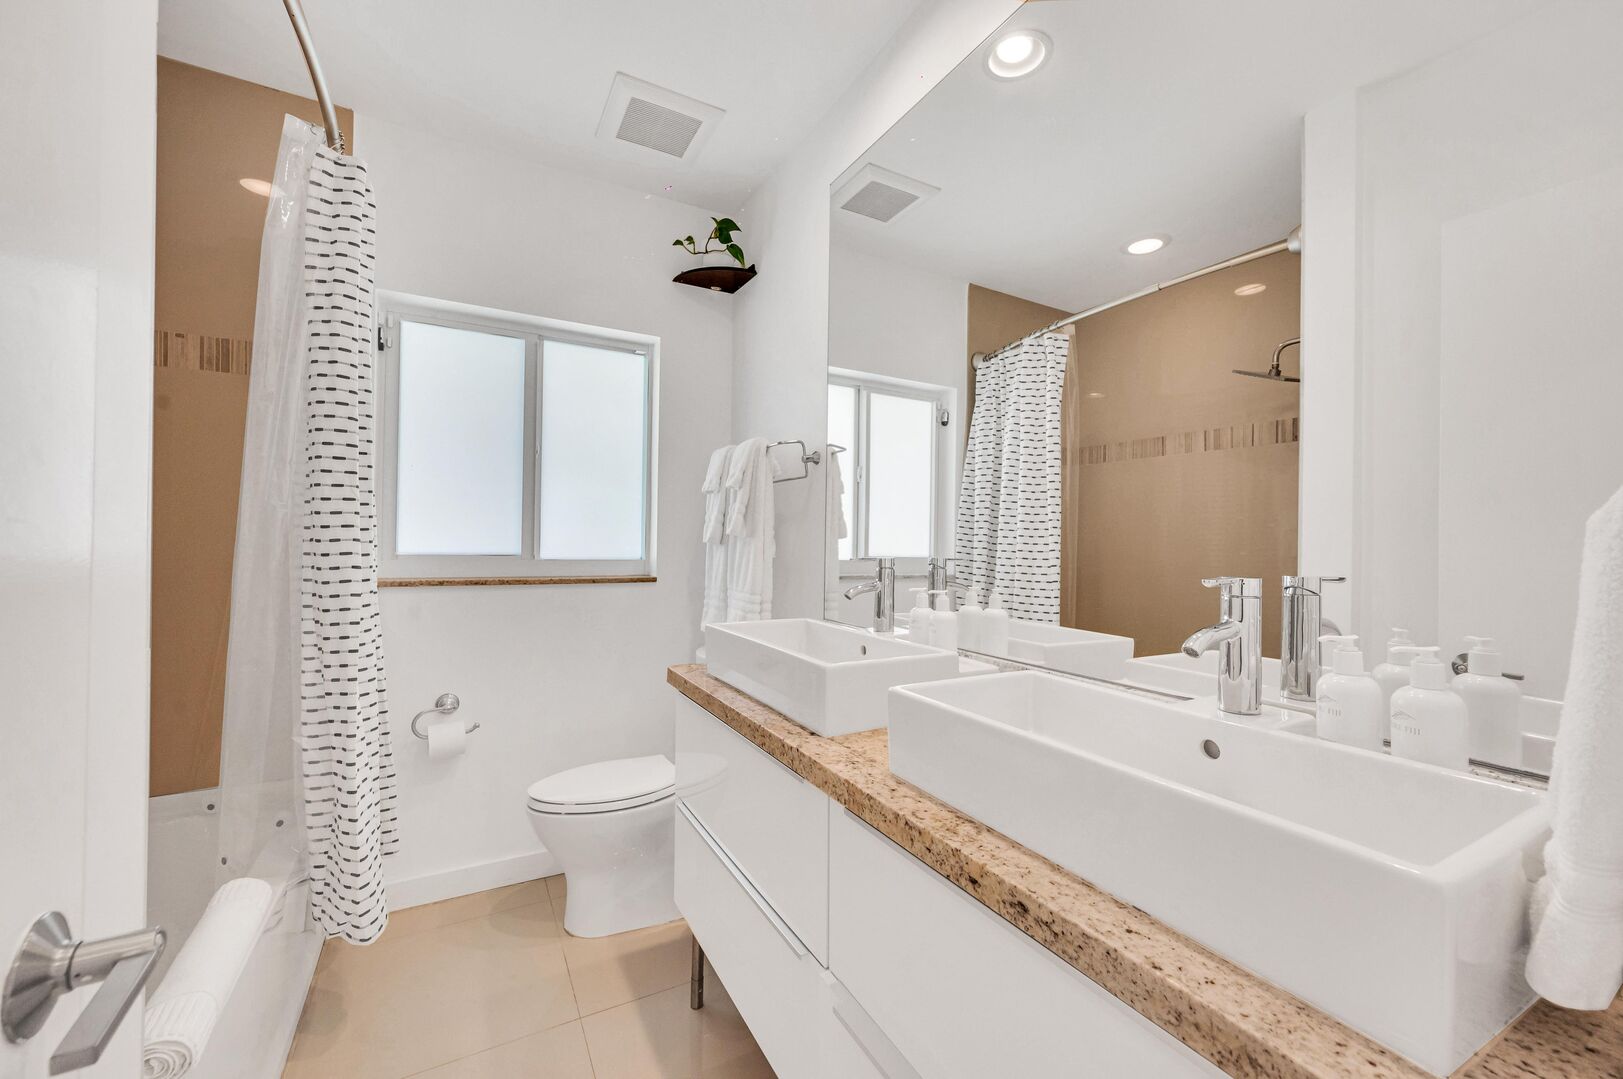 Guests' Oasis of Luxury: Immerse Yourself in Comfort in Our Guest Bathroom, Complete with Double Vanity, Shower/Tub, and Lavish Luxury Soaps. Your Haven of Indulgence Awaits.